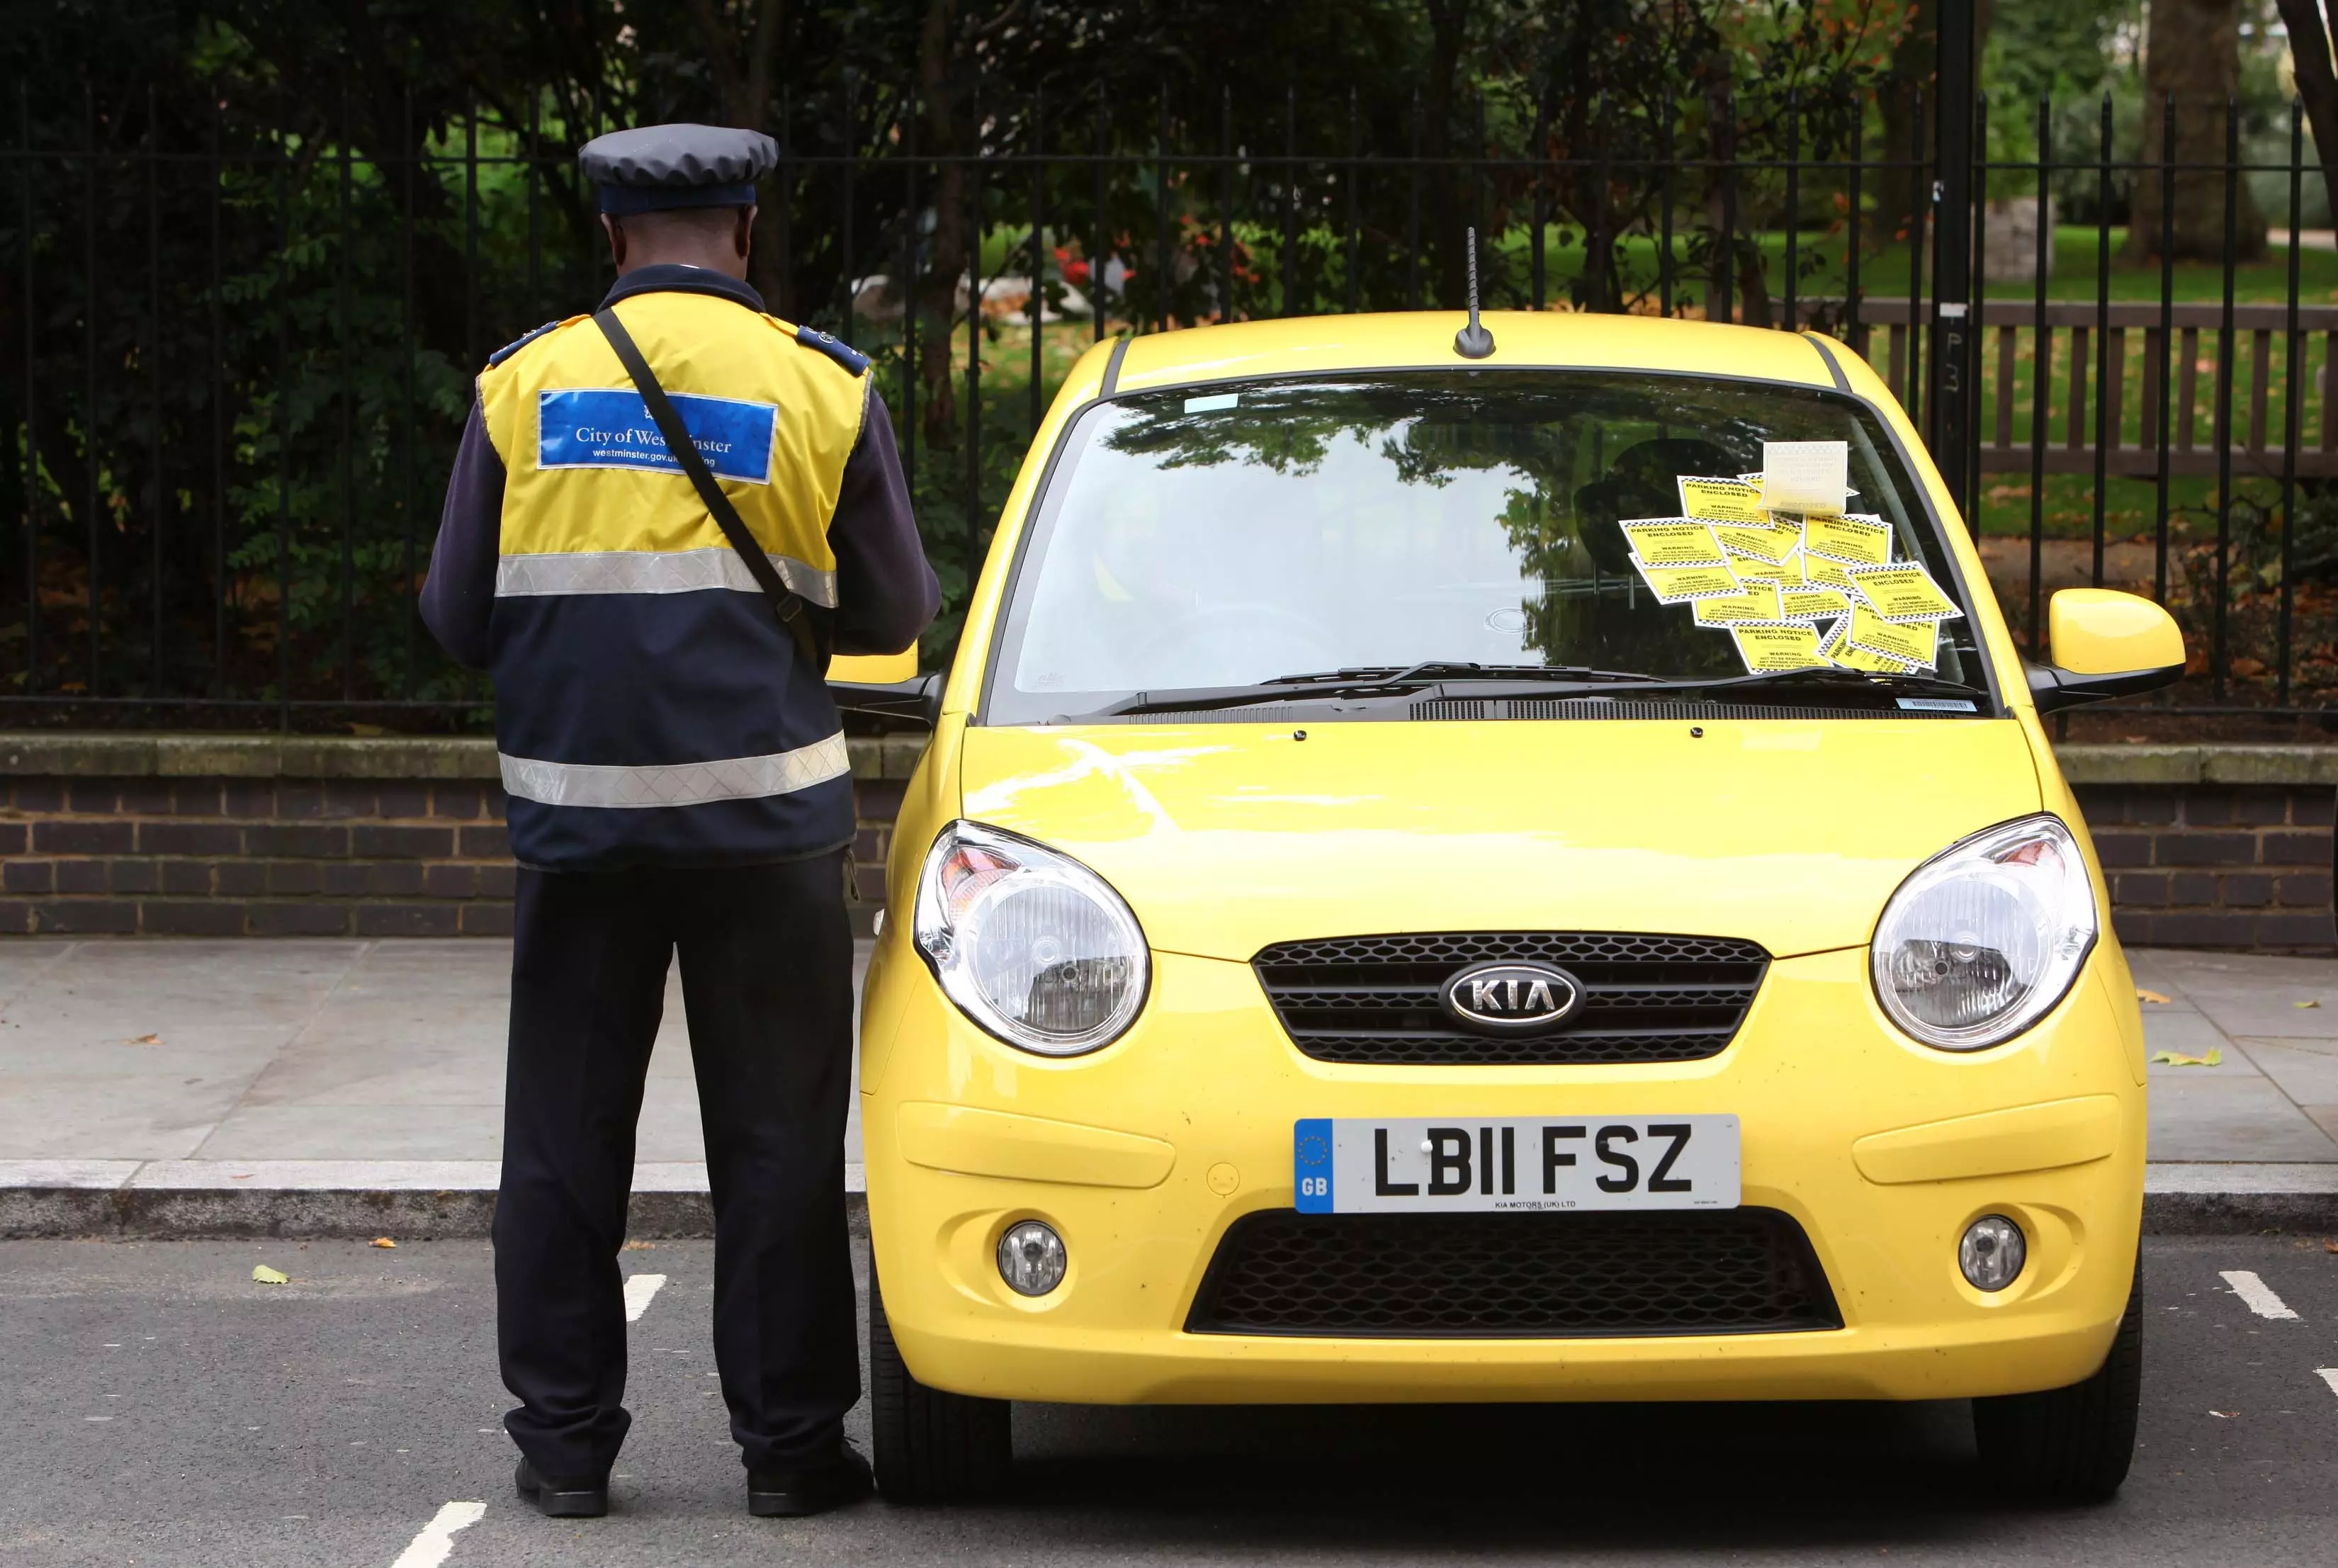 This Guy Has A Top Tip For Not Paying Parking Tickets